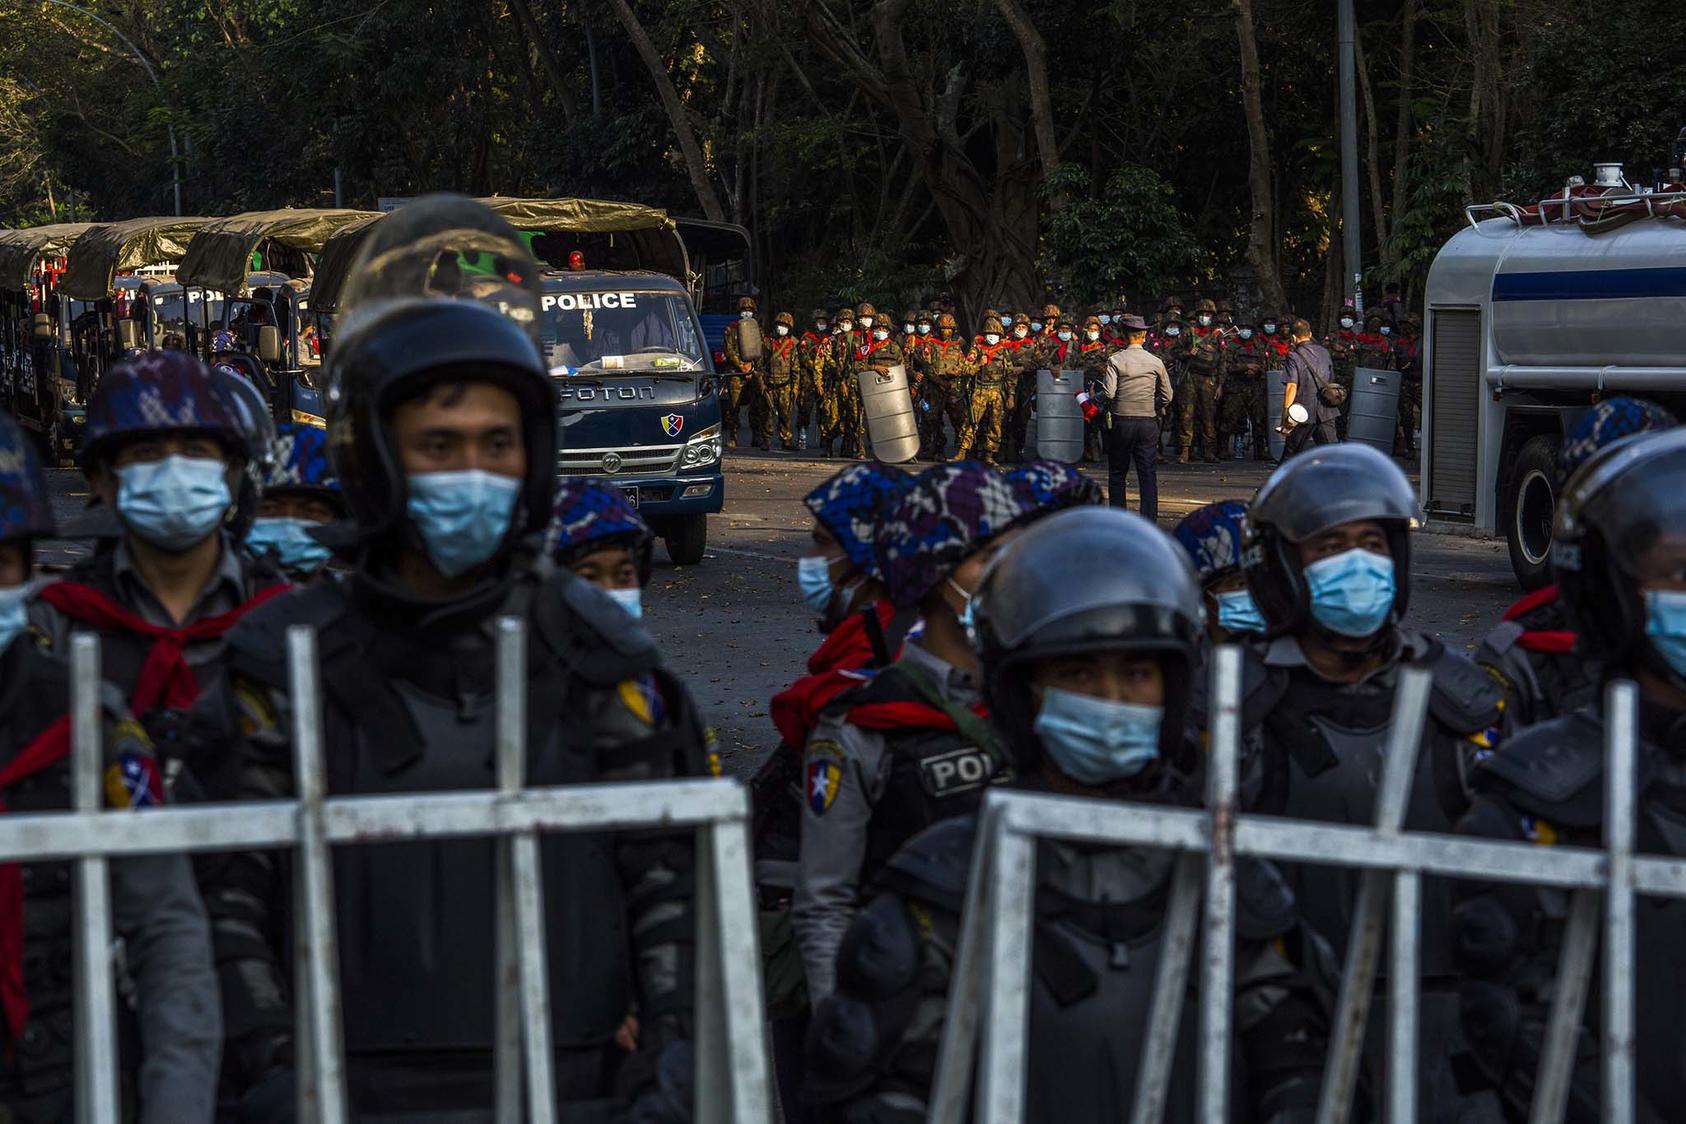 Police and military forces stand by, as tens of thousands of people gather on University Avenue Road to protest against the military's seizure of power, Feb. 9, 2021, in Yangon, Myanmar. (The New York Times)